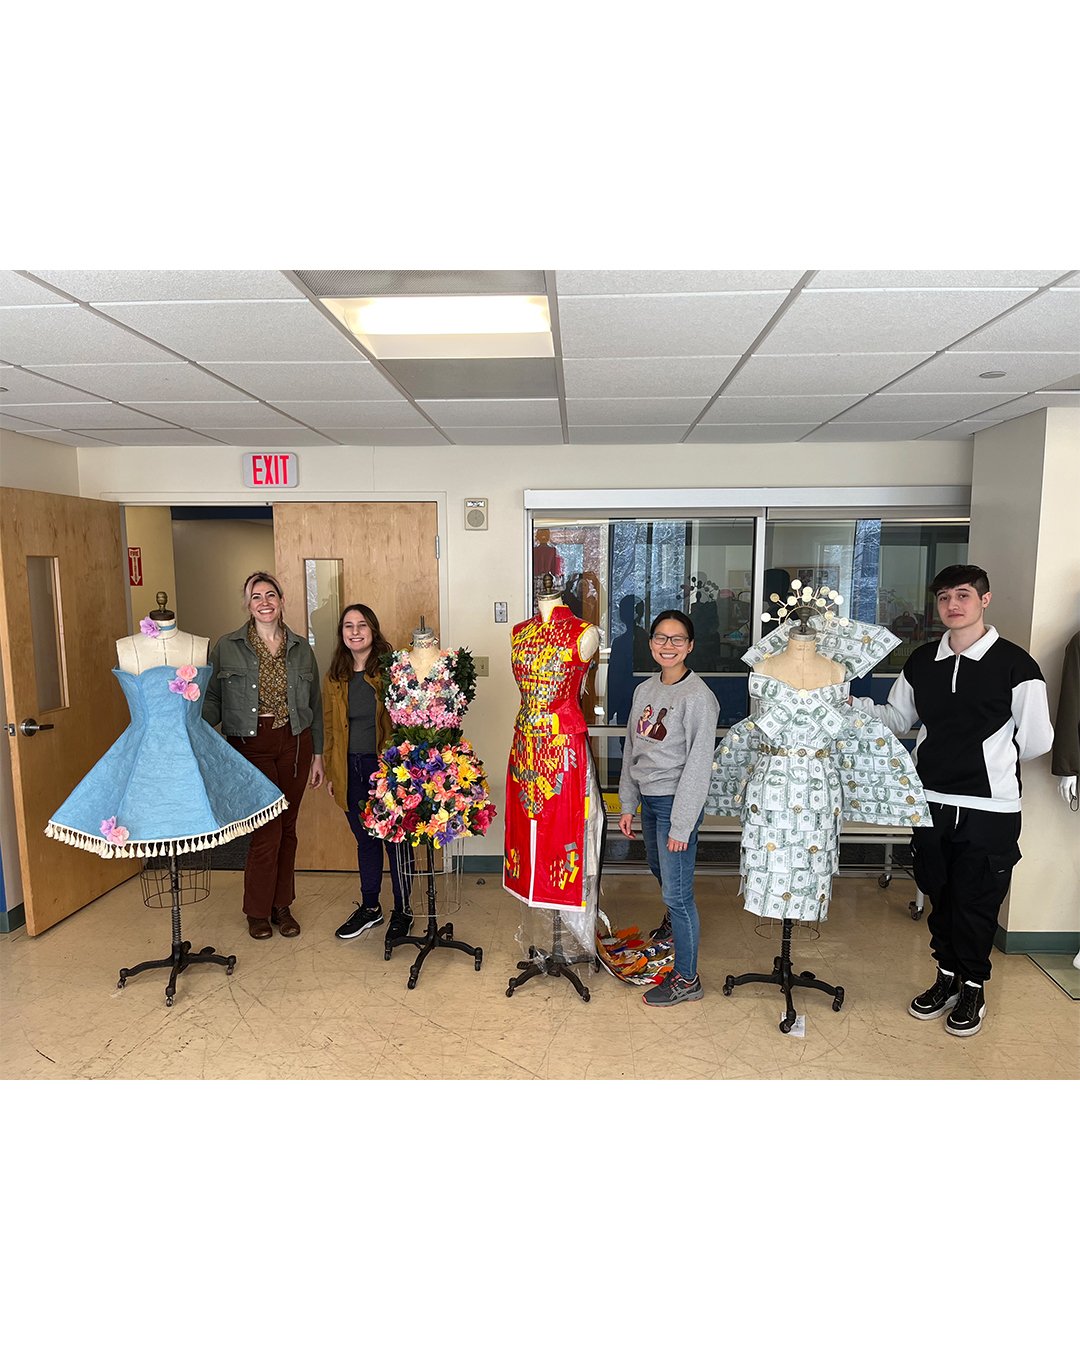 Take a look at the final projects of our 2D &amp; 3D design students! We always love witnessing the extraordinary creativity and individuality of our students, particularly when they are challenged to work with unconventional materials!
.
.
.
.
.
.
#